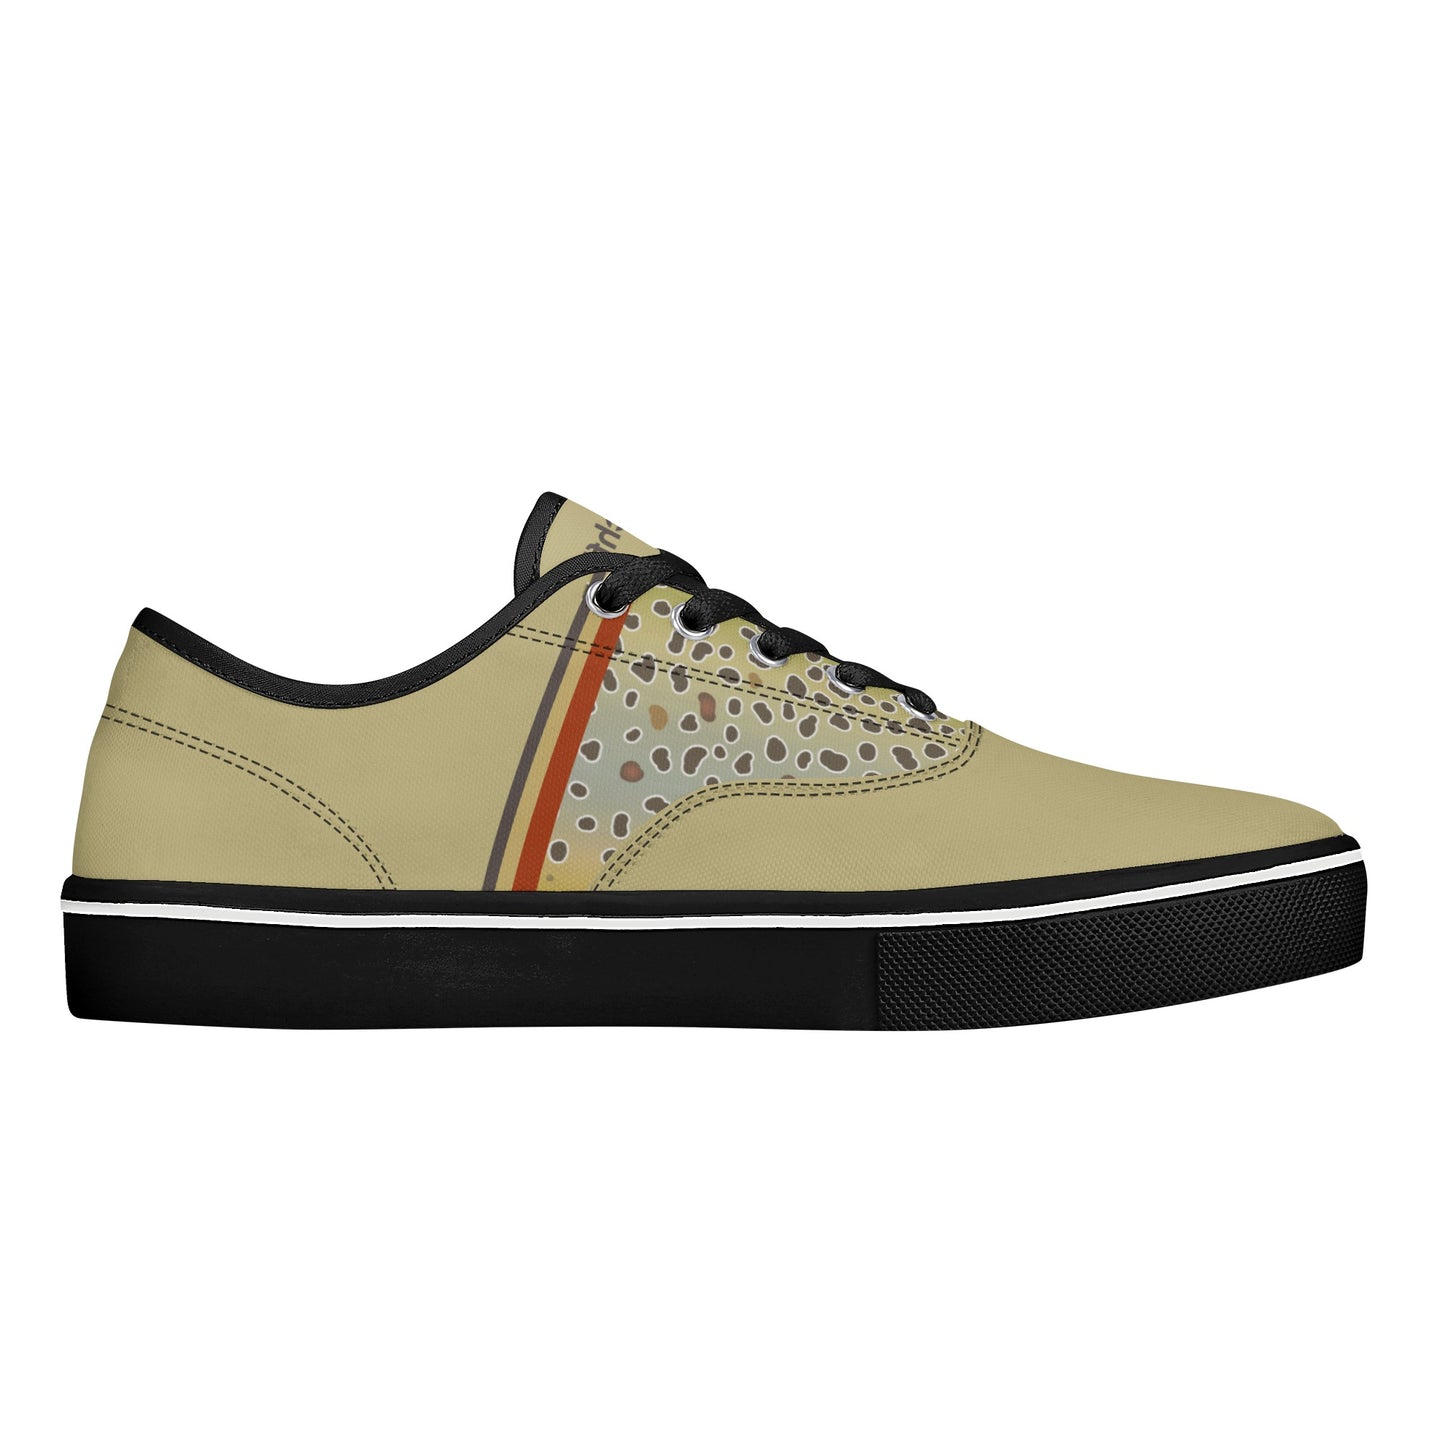 Womens Browntown Racer Canvas Boat Shoe